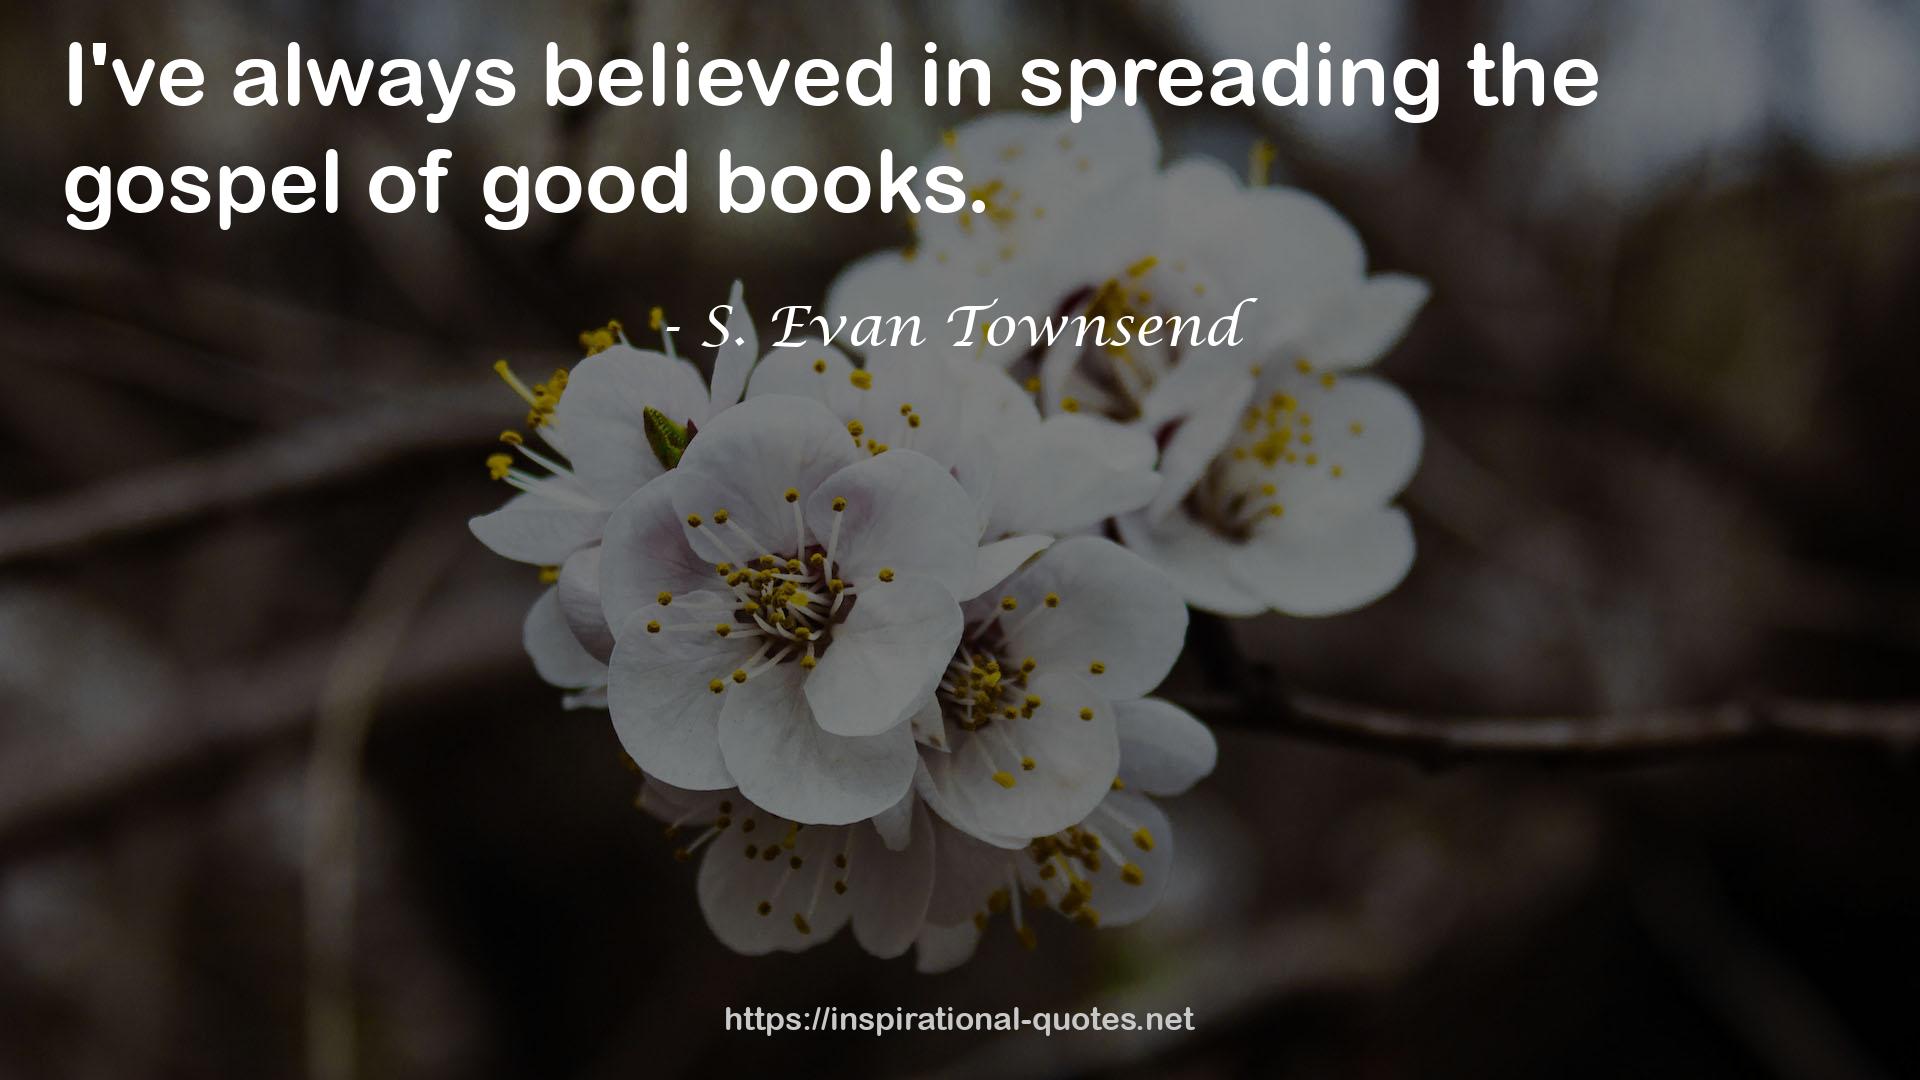 S. Evan Townsend QUOTES